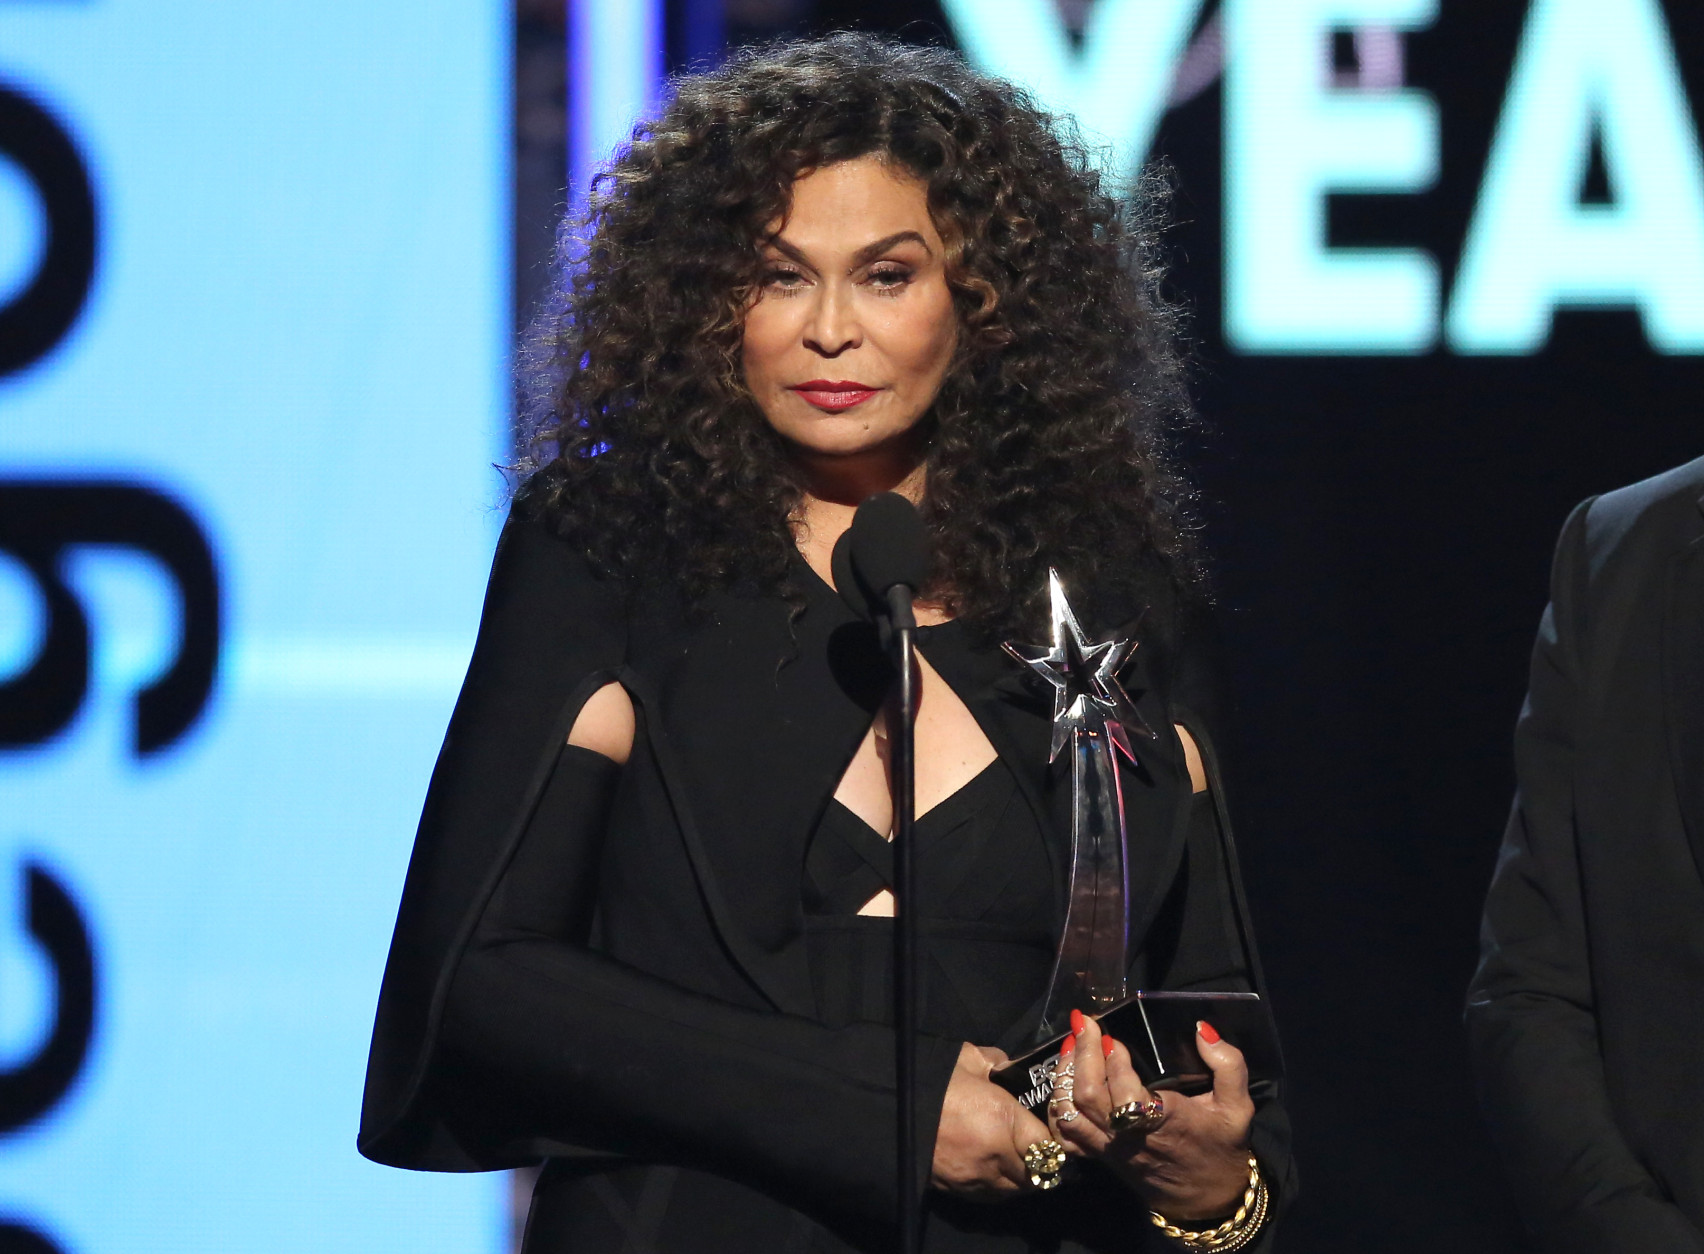 Tina Knowles accepts the award for video of the year on behalf of Beyonce for Formation at the BET Awards at the Microsoft Theater on Sunday, June 26, 2016, in Los Angeles. (Photo by Matt Sayles/Invision/AP)